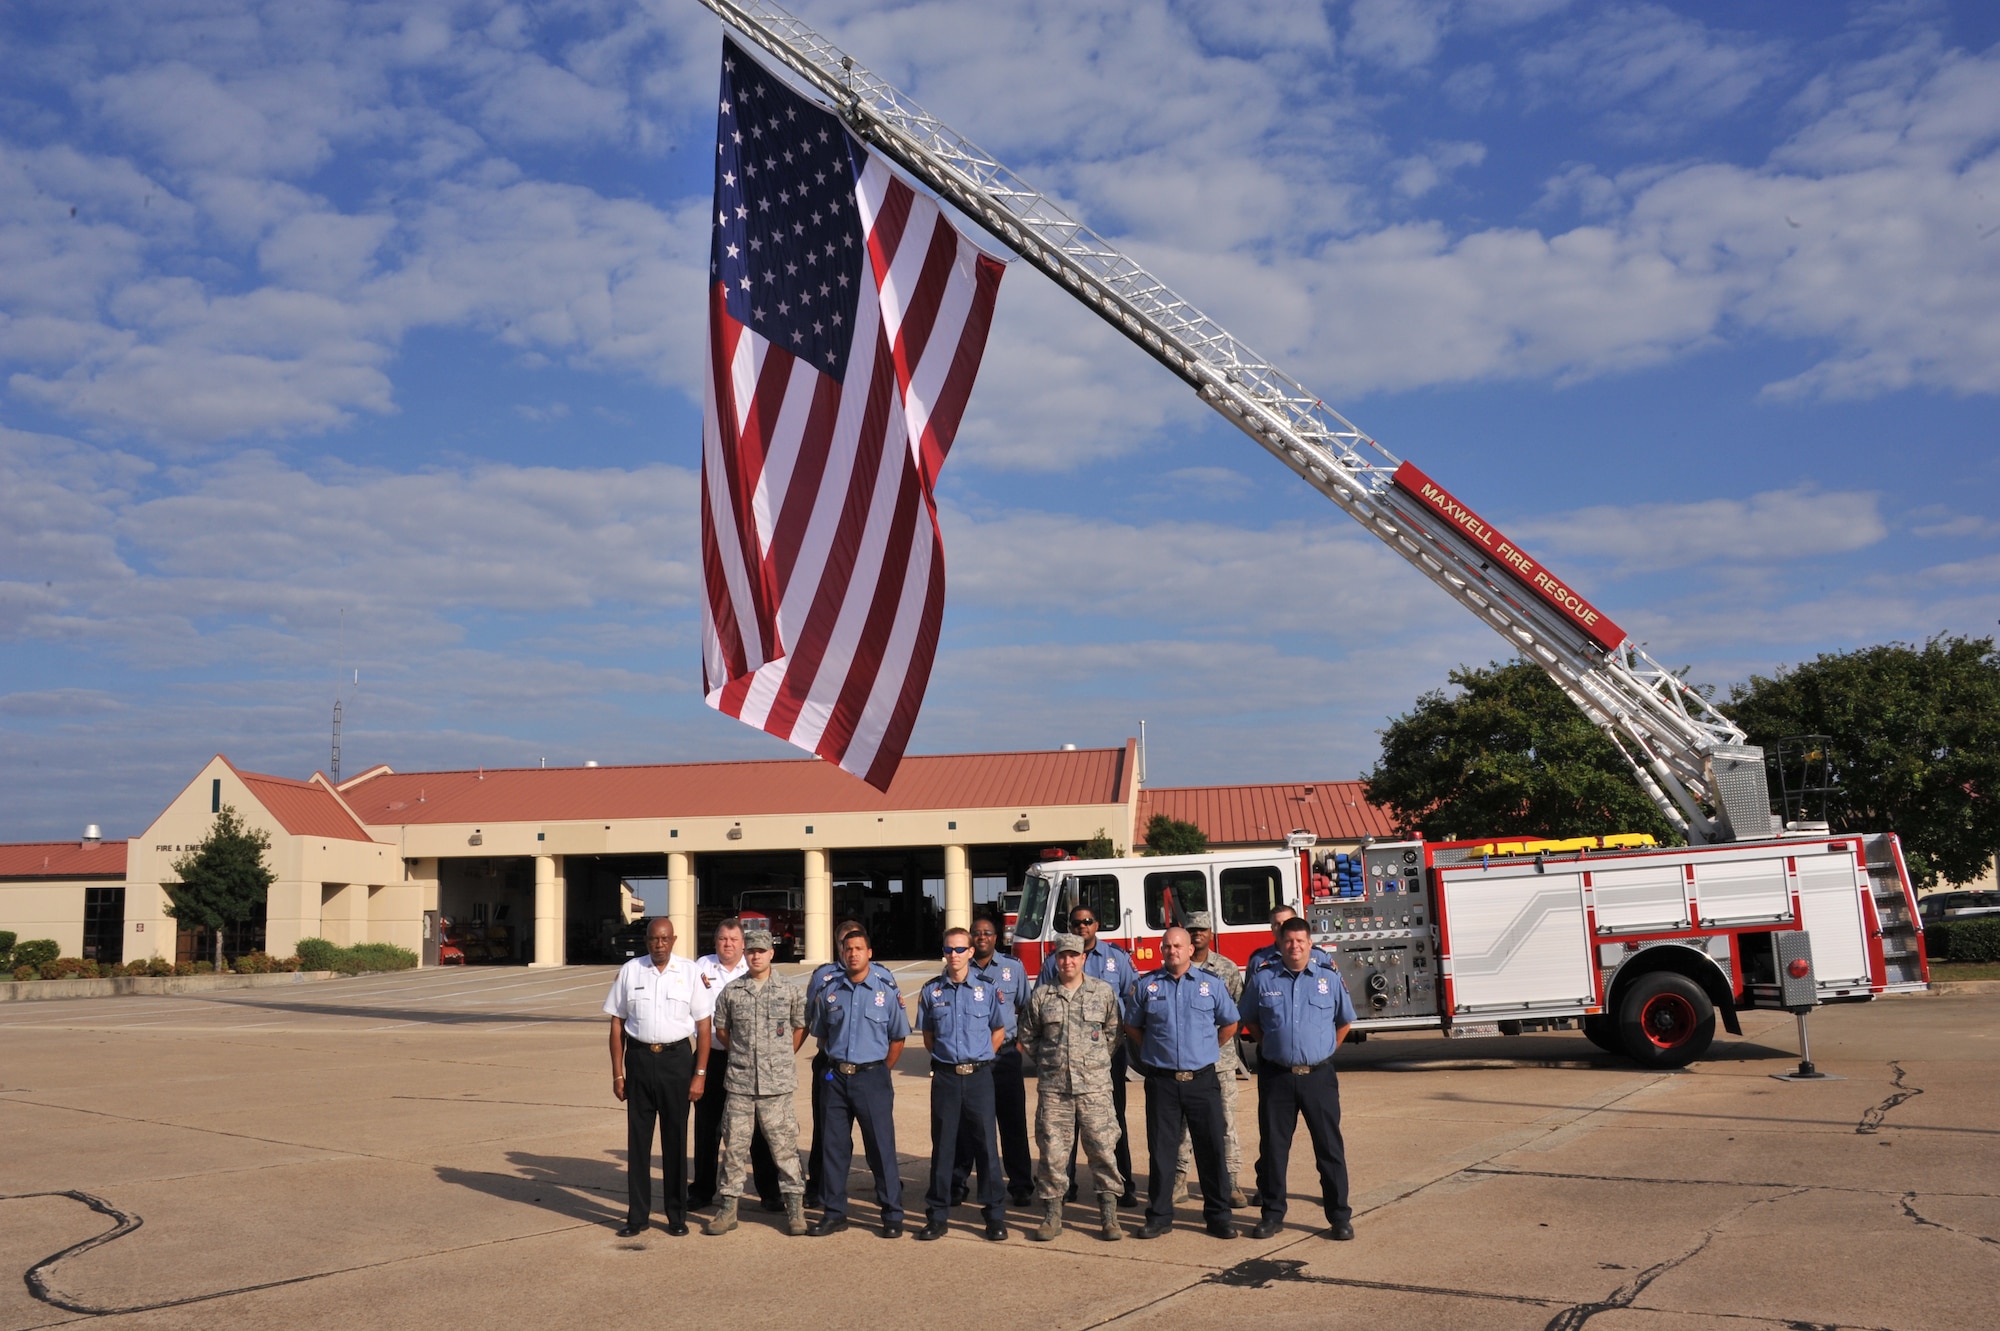 Firefighters from Maxwell Air Force Base pose for a photo in front of the American flag, Sept. 11. Maxwell's fire department flies the flag at half- staff, honoring those who lost their lives 11 years ago in New York City. (U.S. Air Force photo by Airman 1st Class William Blankenship) 